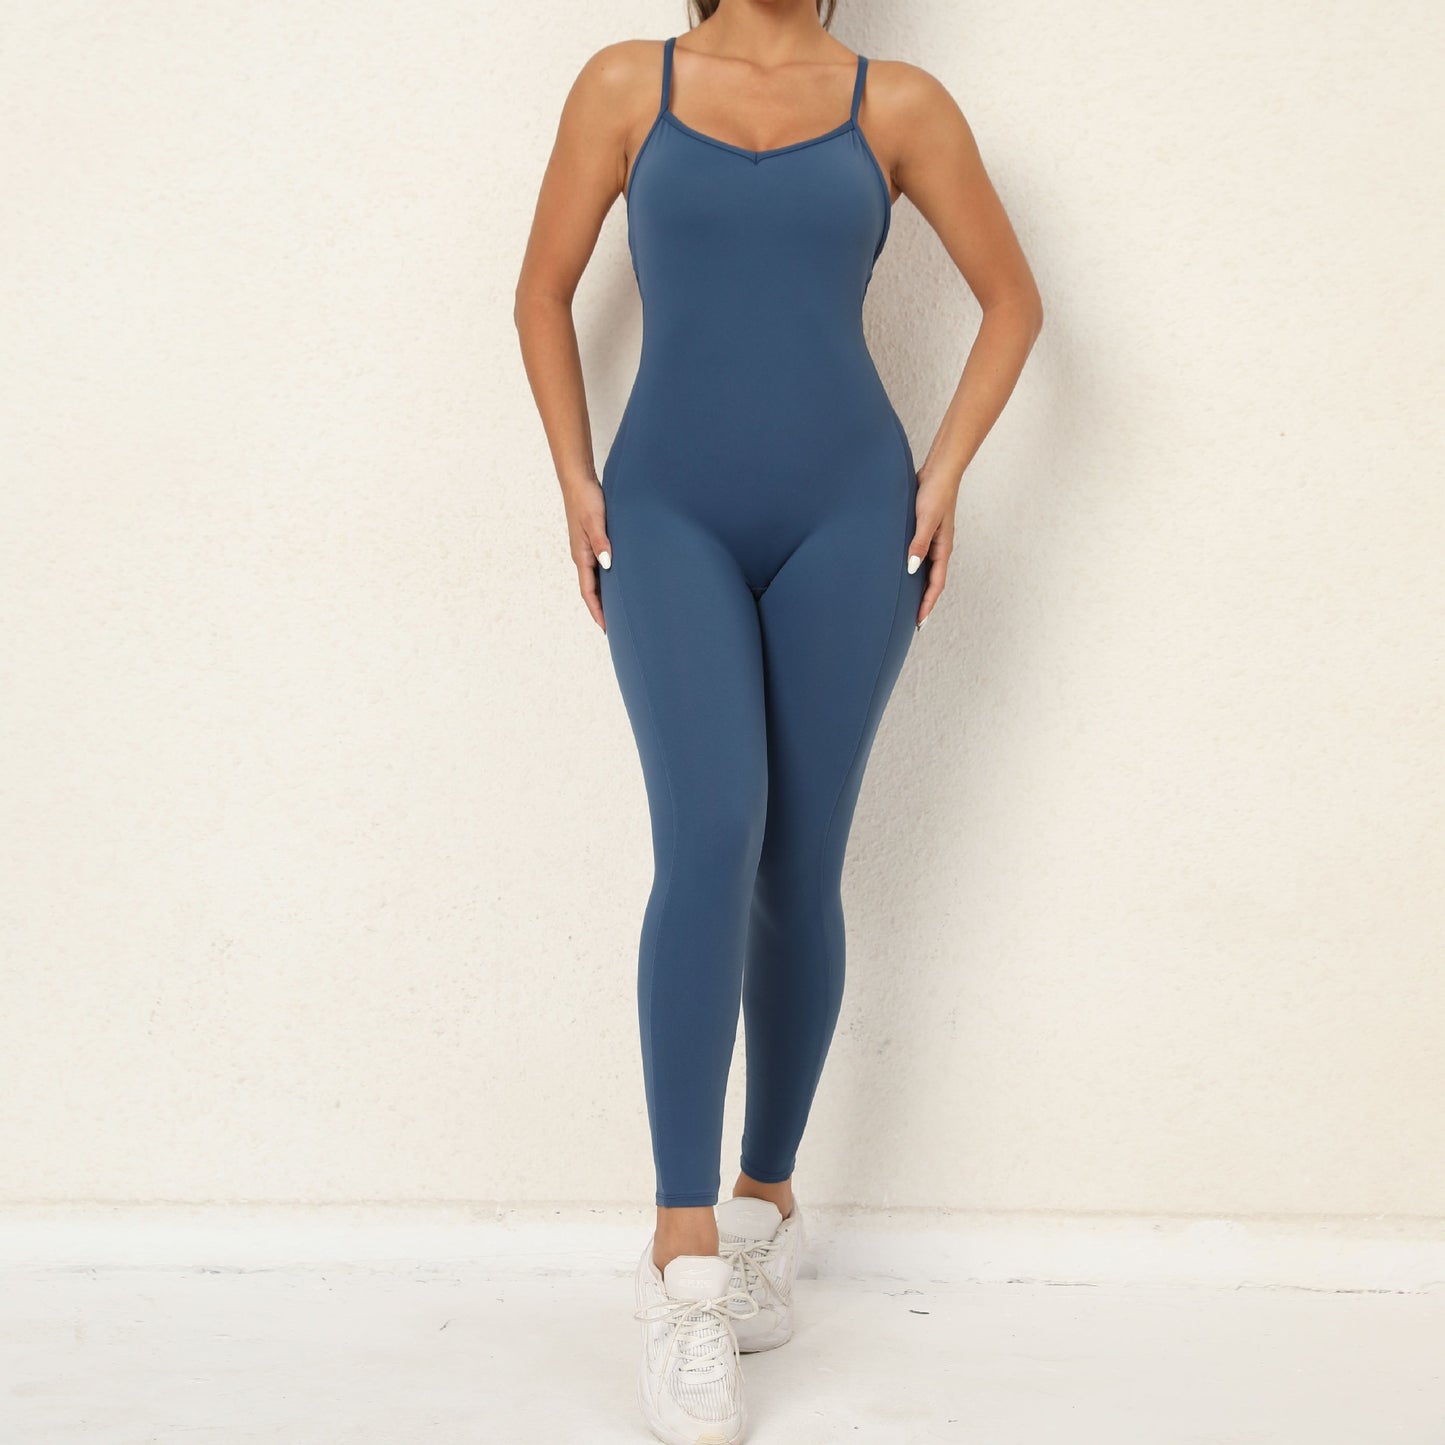 Backless One Piece Yoga Suit